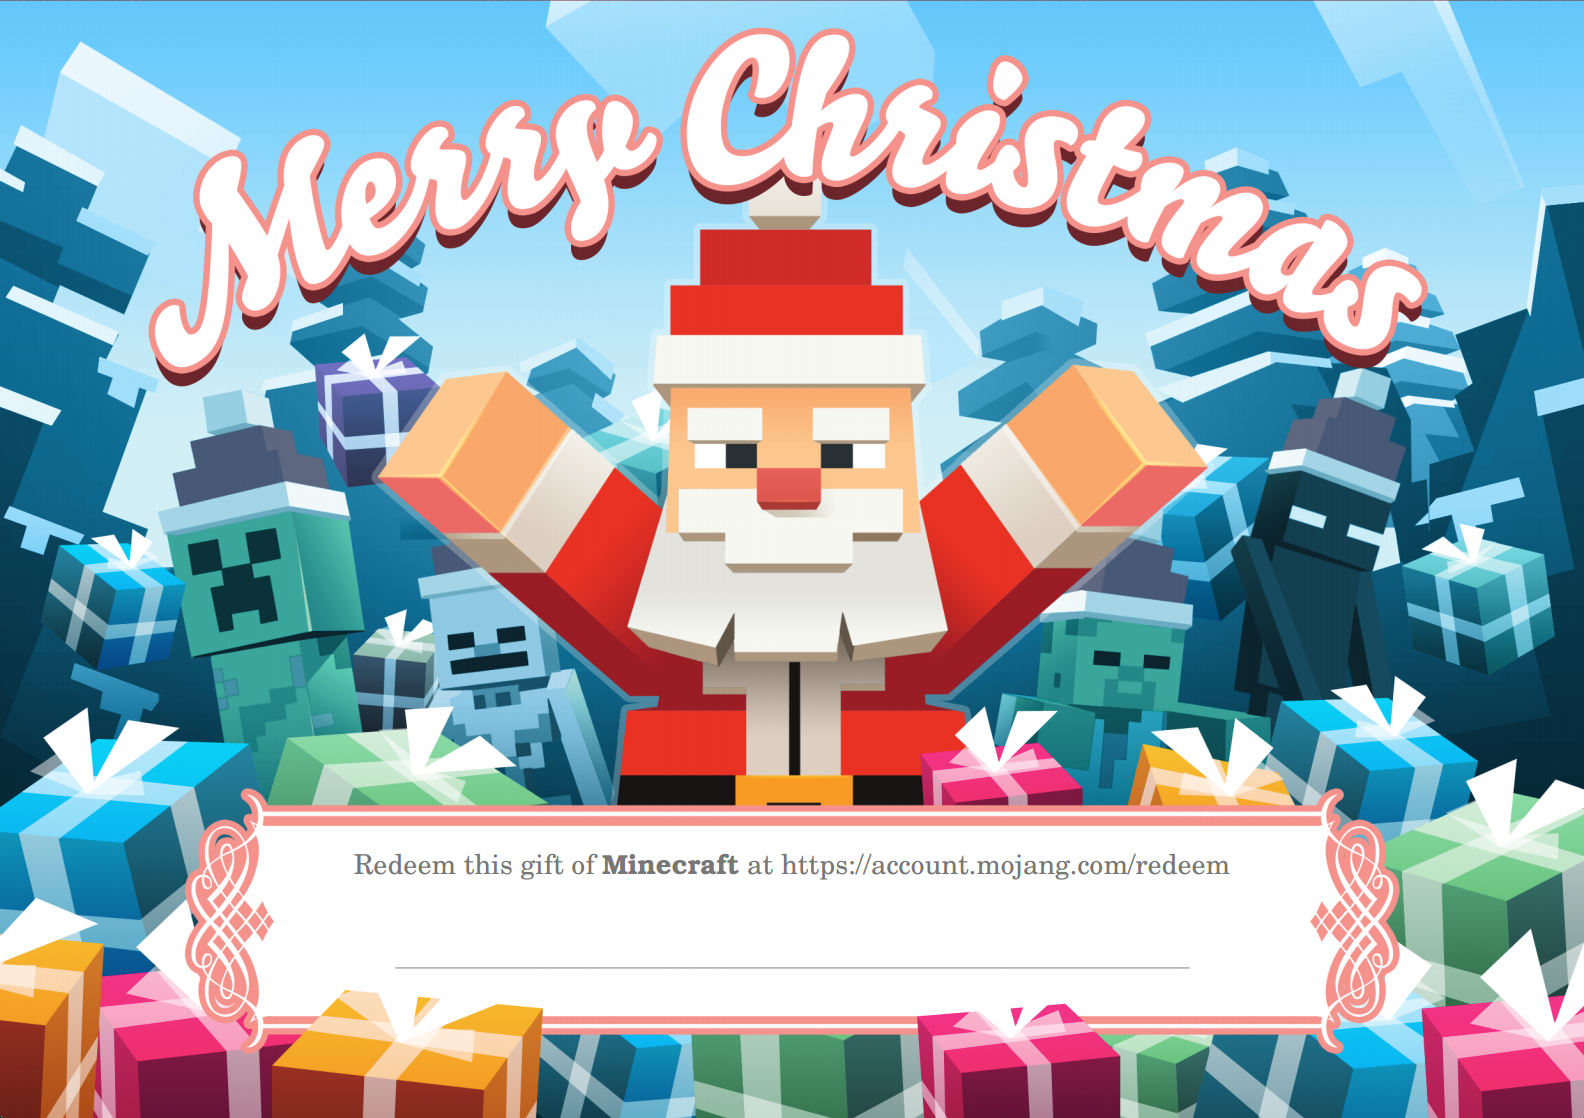 giving-the-gift-of-minecraft-do-it-with-festive-style